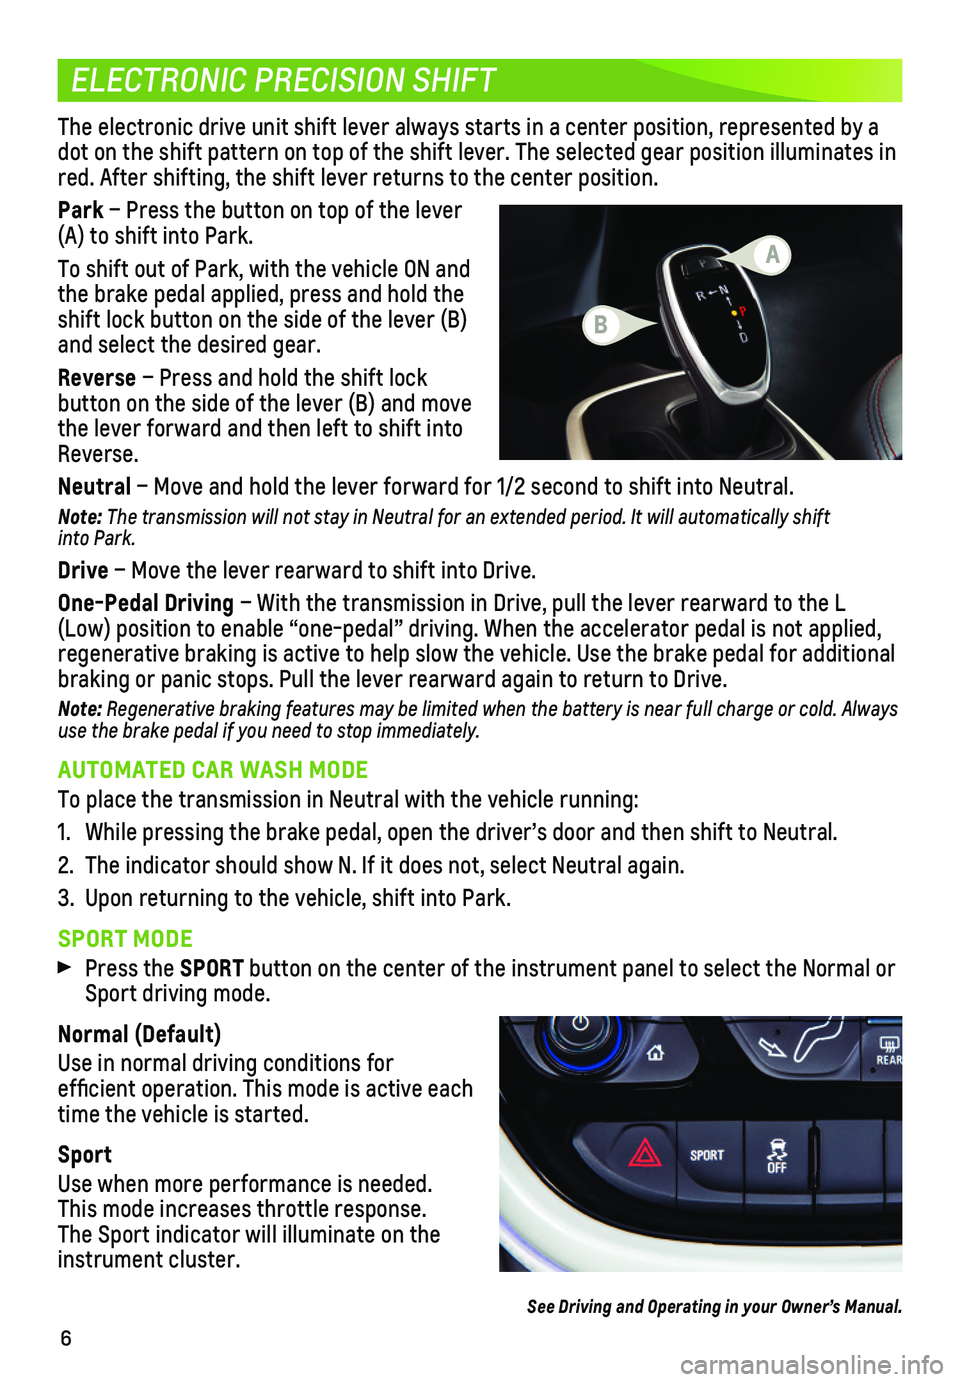 CHEVROLET BOLT EV 2020  Get To Know Guide 6
ELECTRONIC PRECISION SHIFT
The electronic drive unit shift lever always starts in a center position\
, represented by a dot on the shift pattern on top of the shift lever. The selected gear positi\